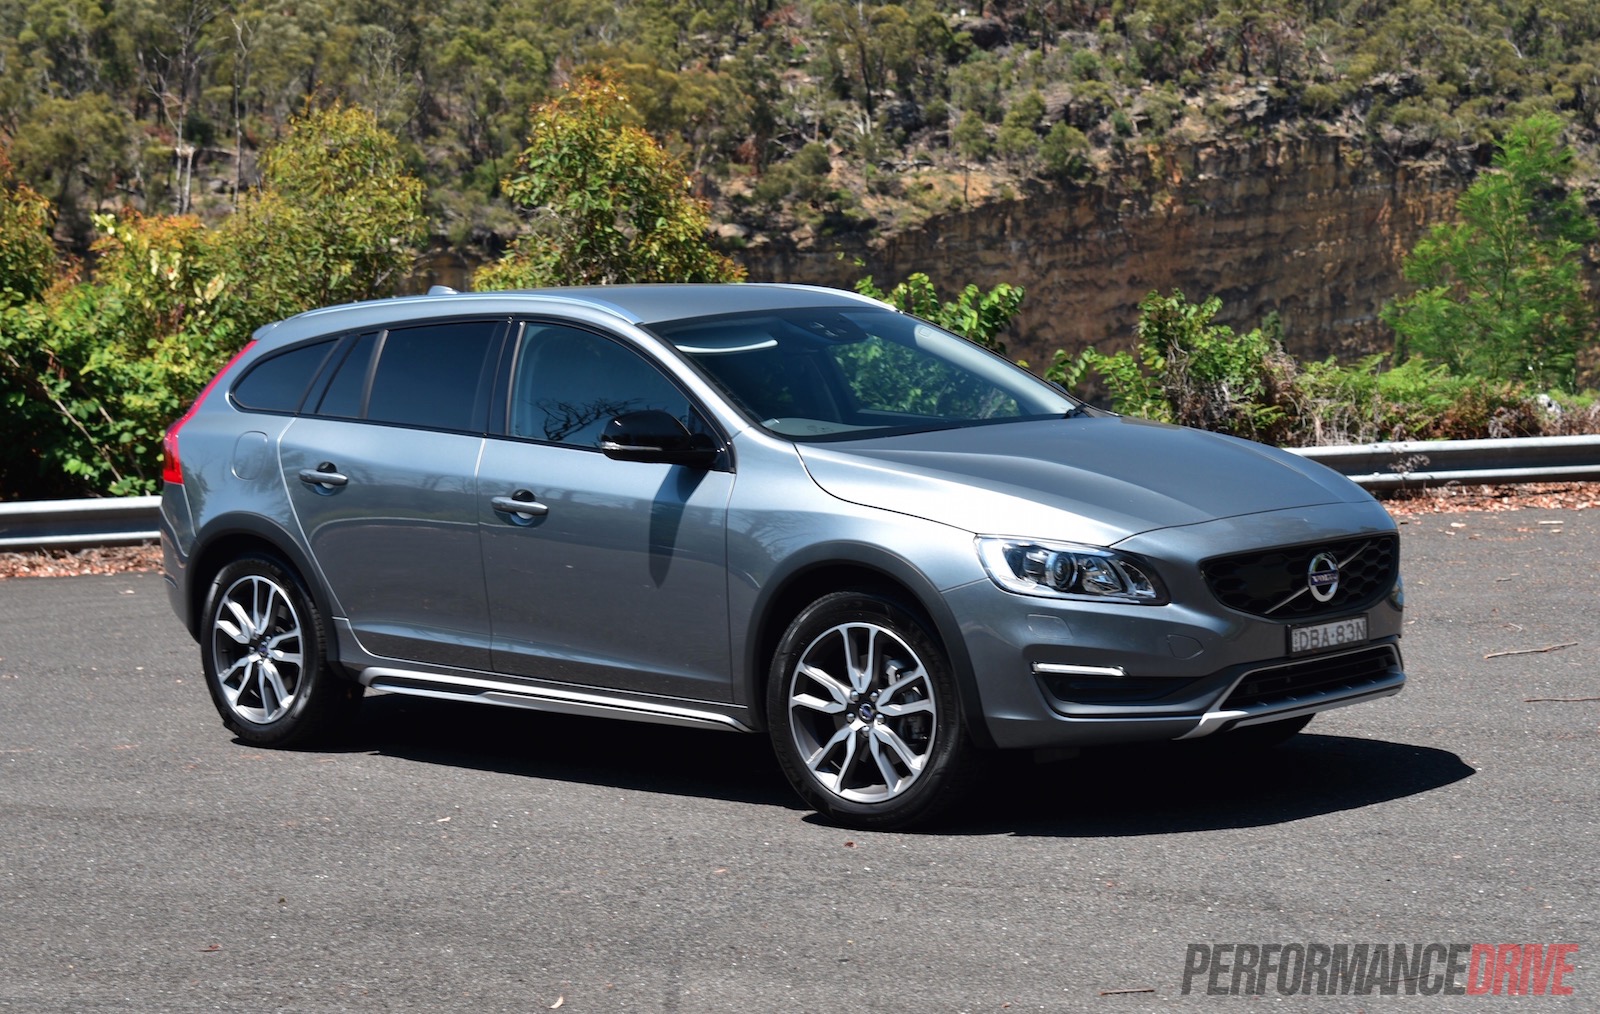 2016 Volvo V60 Cross Country D4 review (video) | PerformanceDrive